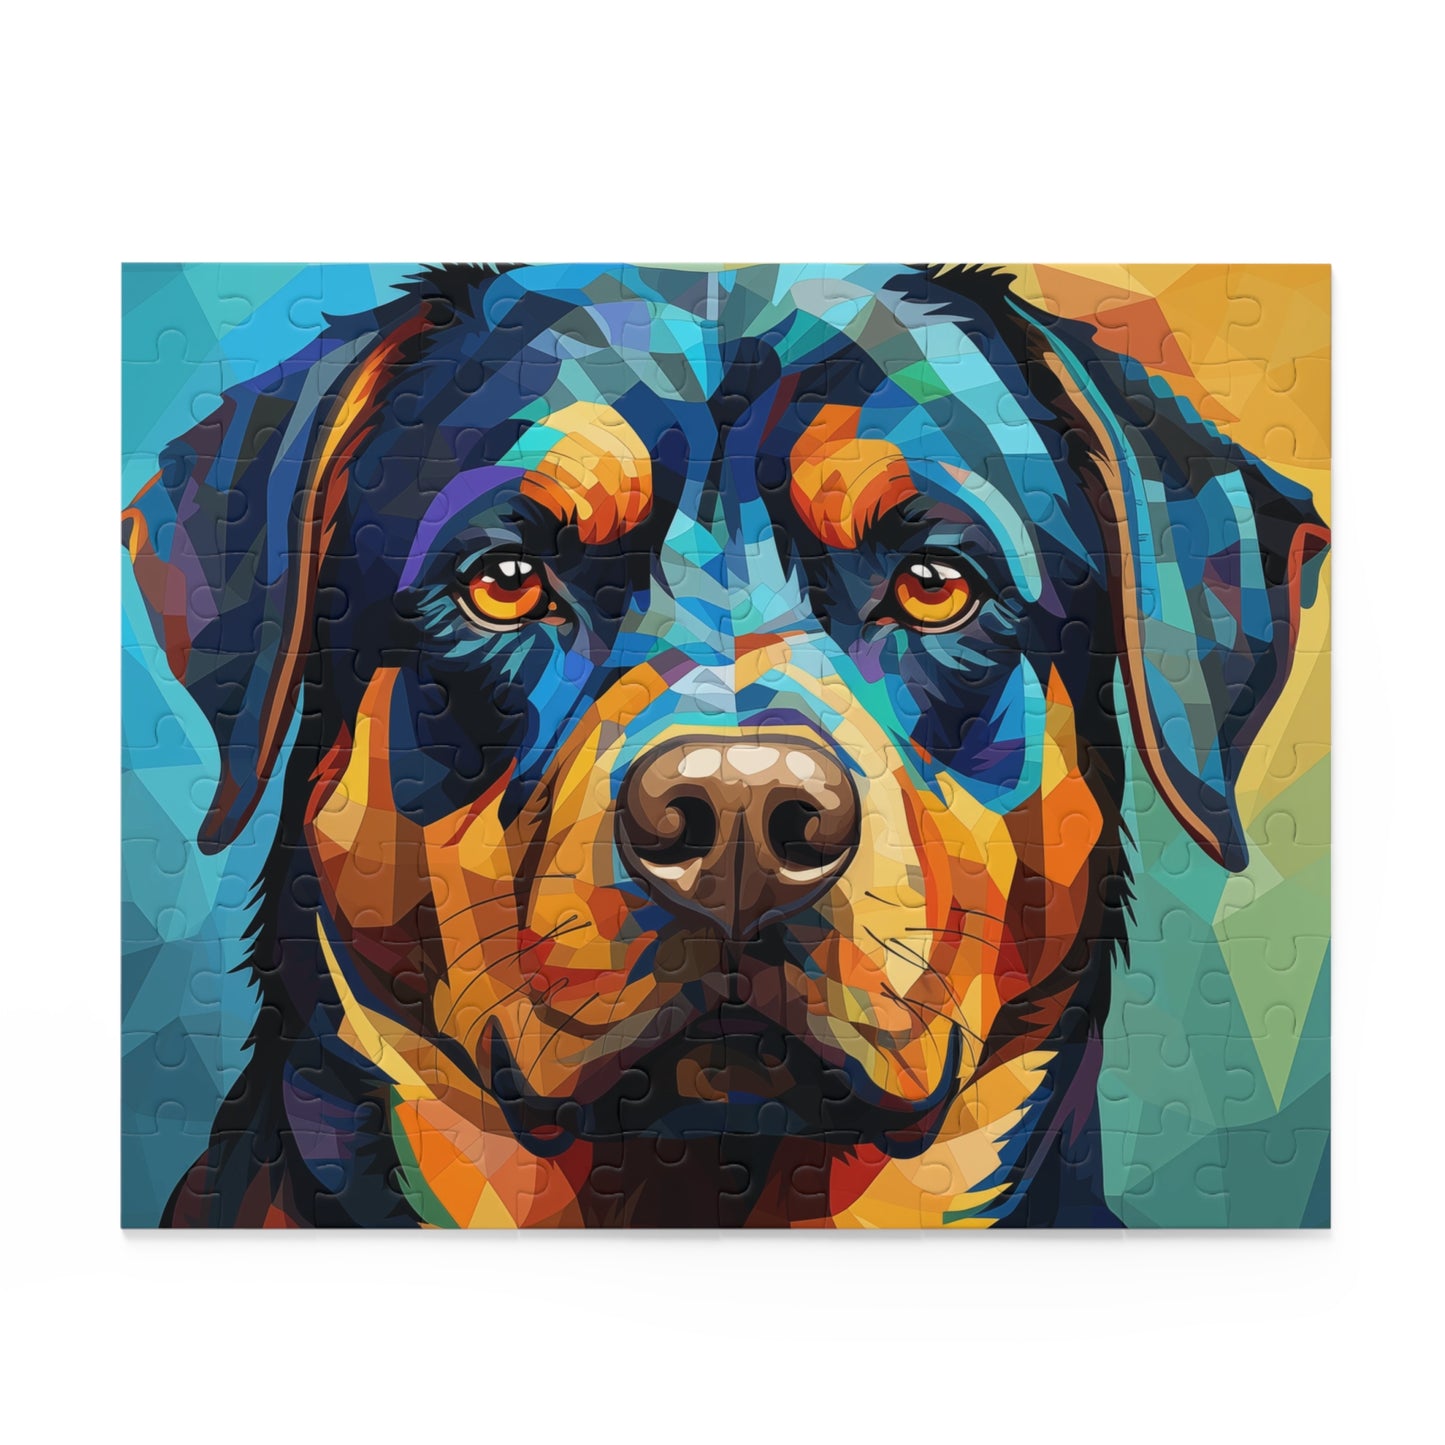 Watercolor Rottweiler Puzzle for Boys, Girls, Kids - Jigsaw Vibrant Oil Paint Dog Puzzle - Abstract Lover Gift - Rottweiler Trippy Puzzle Adult Birthday Business Jigsaw Puzzle Gift for Him Funny Humorous Indoor Outdoor Game Gift For Her Online-2